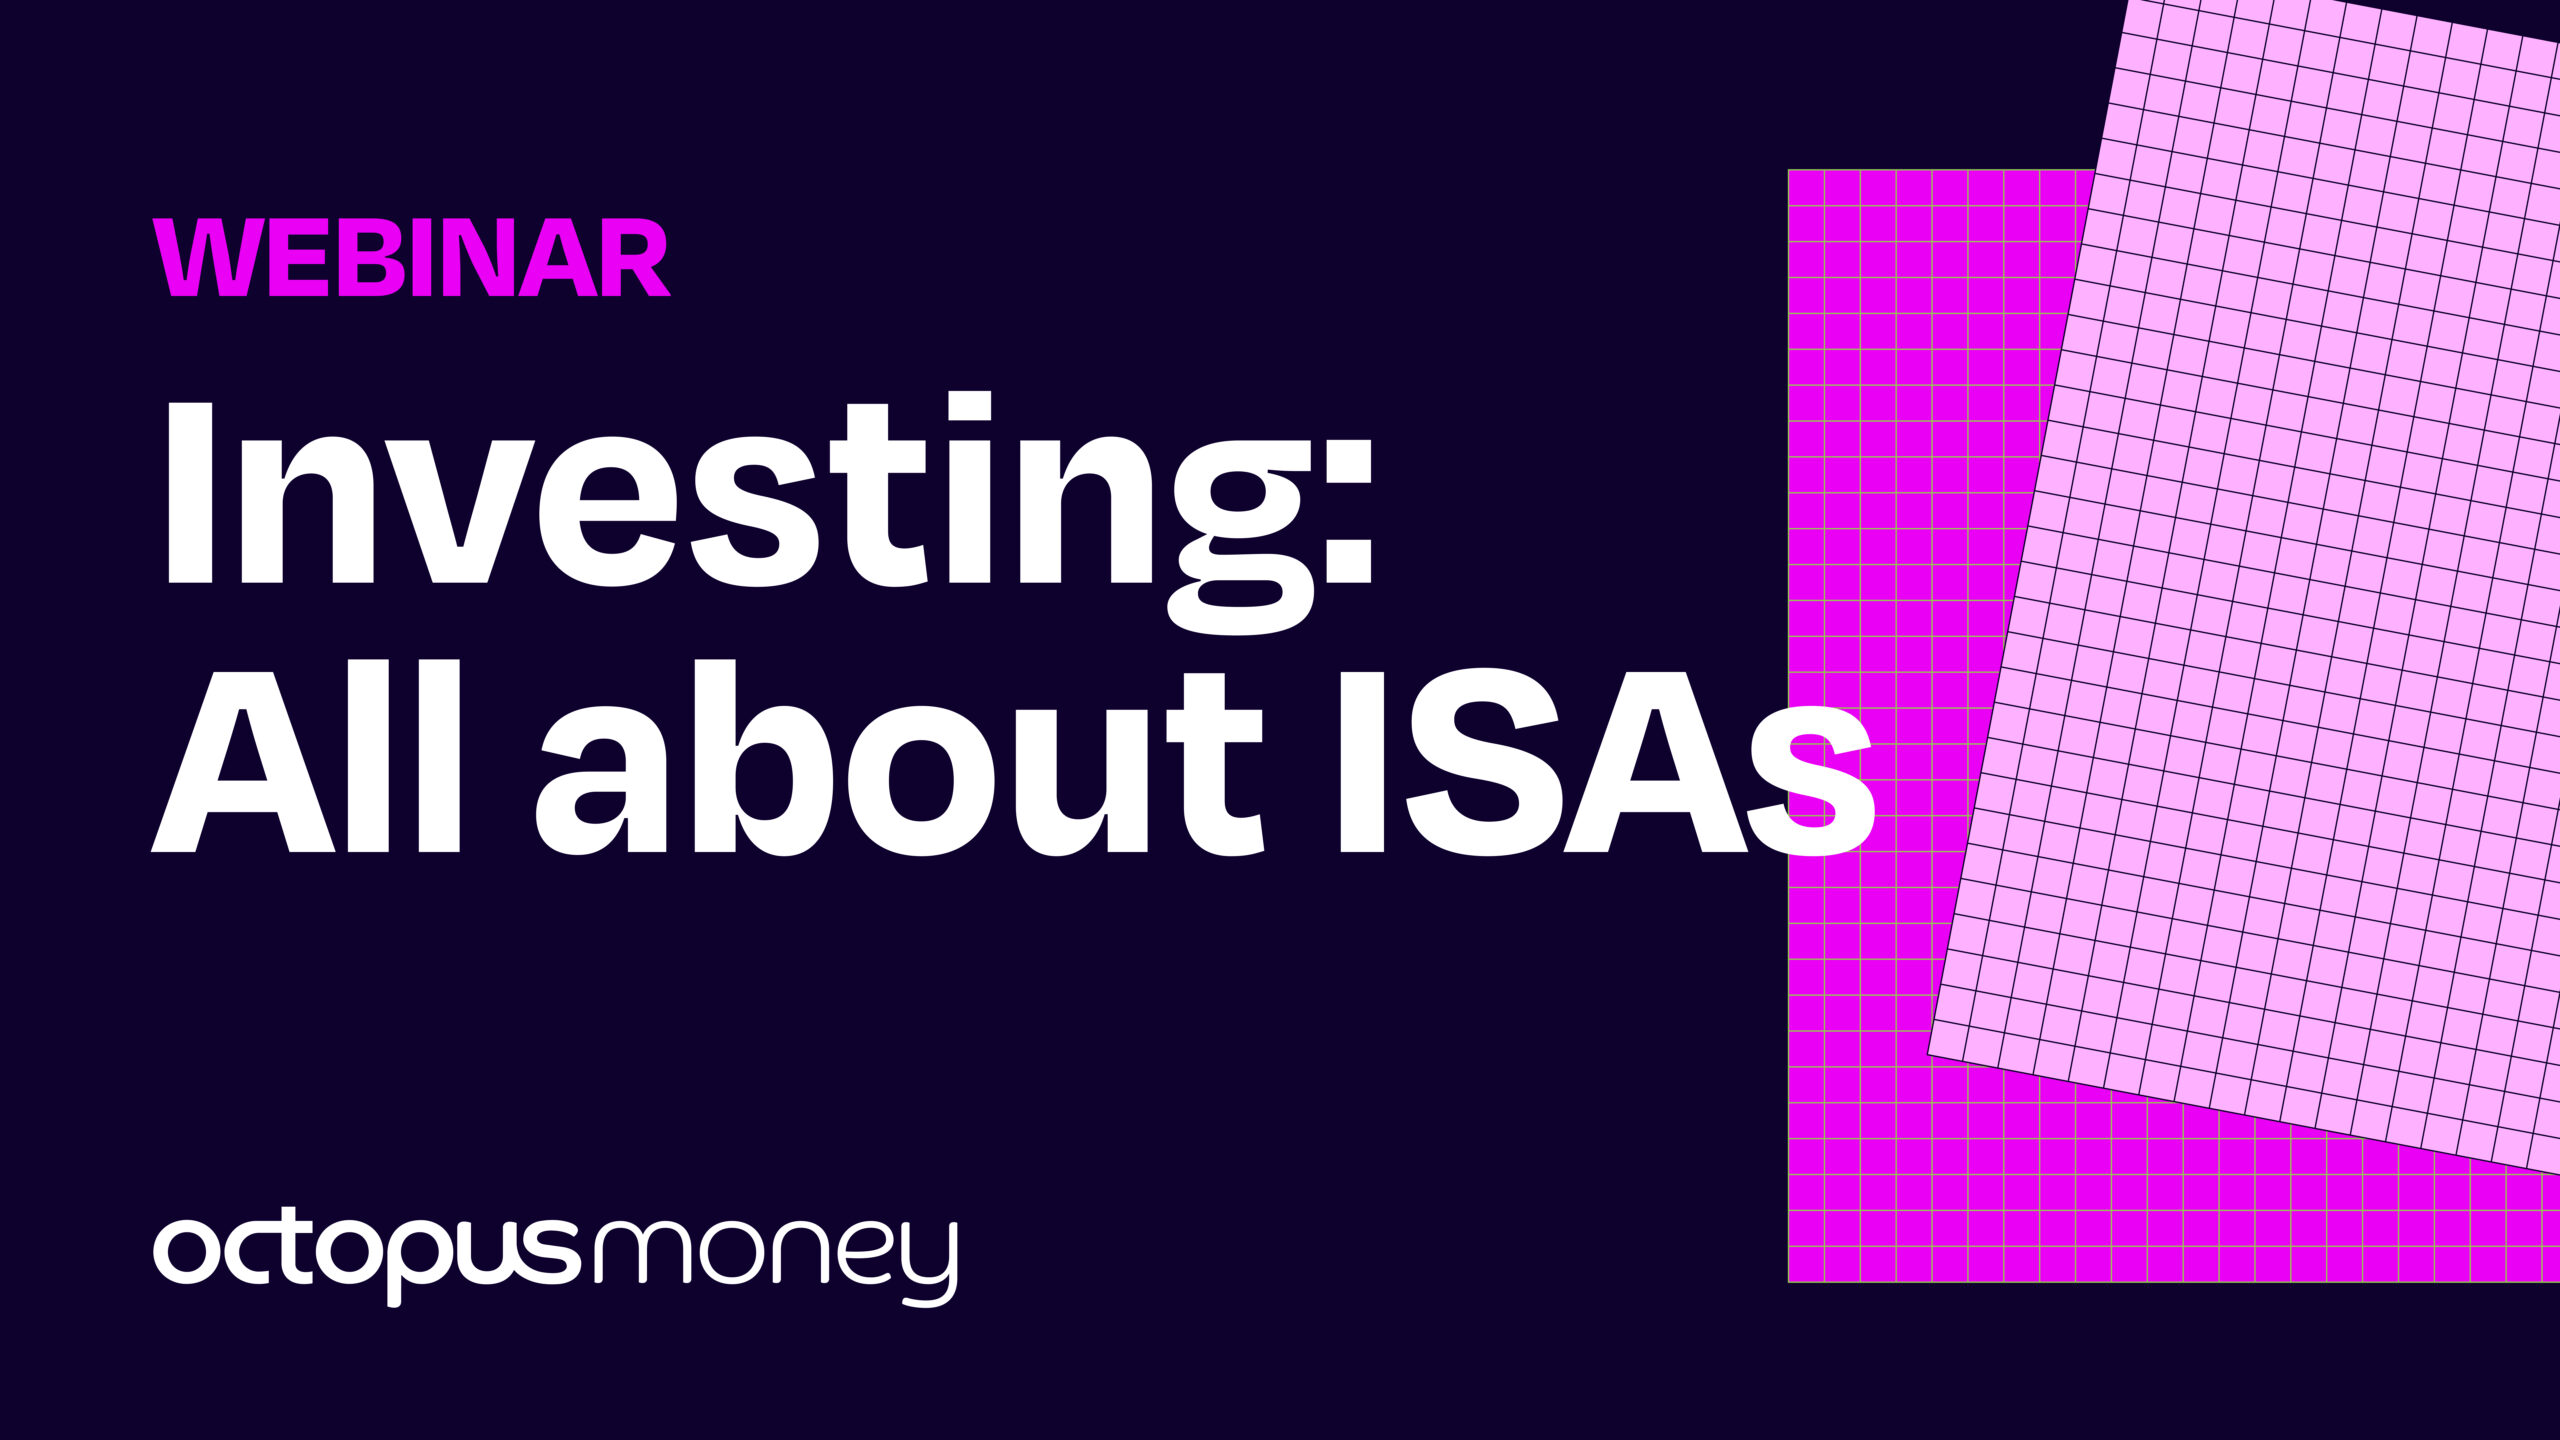 Investing: All about ISAs